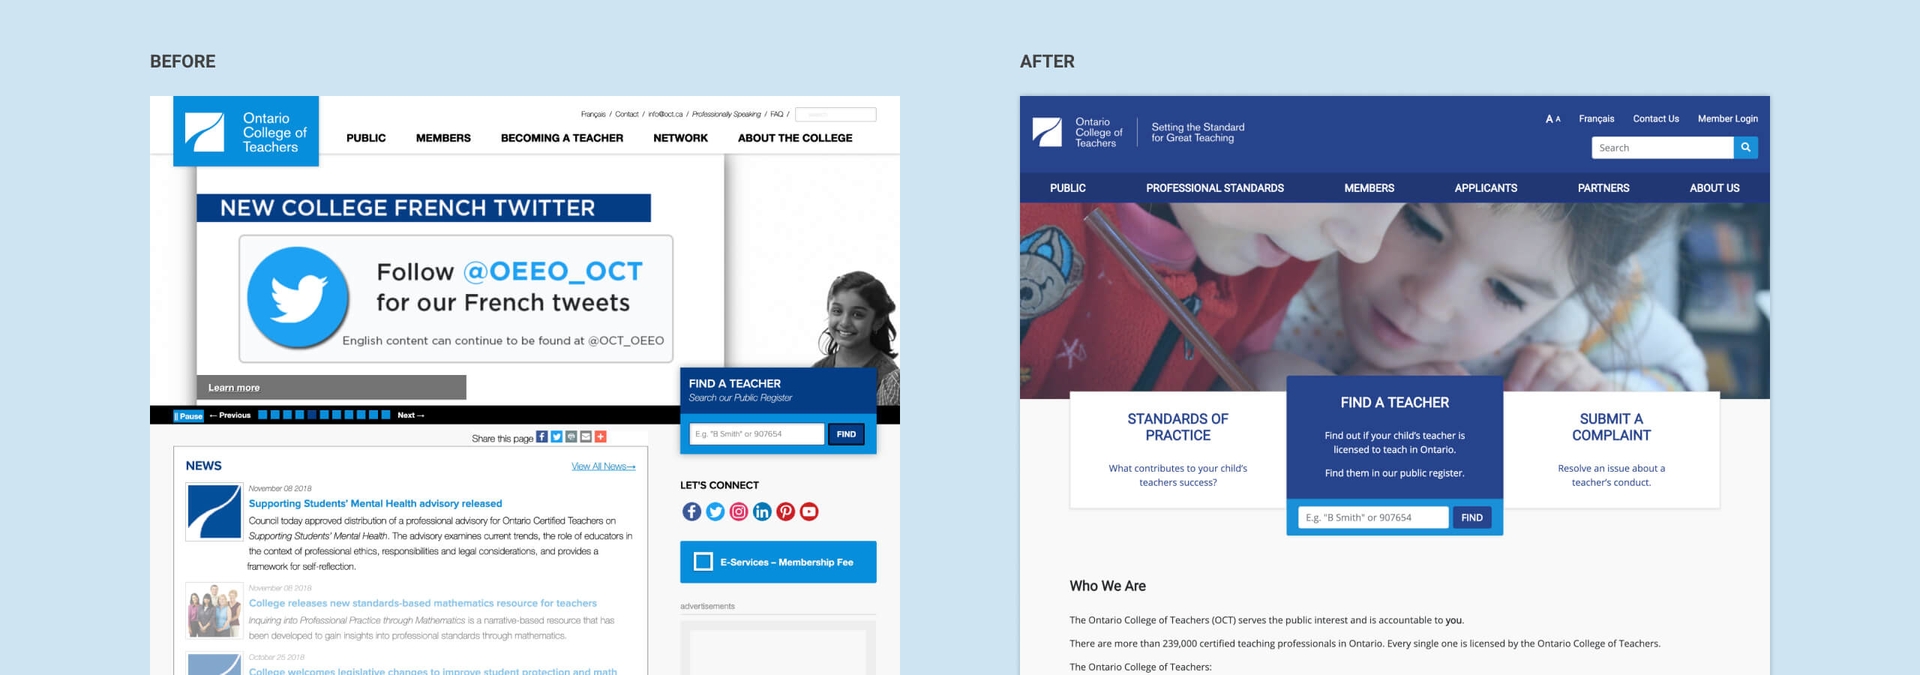 Homepage Comparison: Before and After